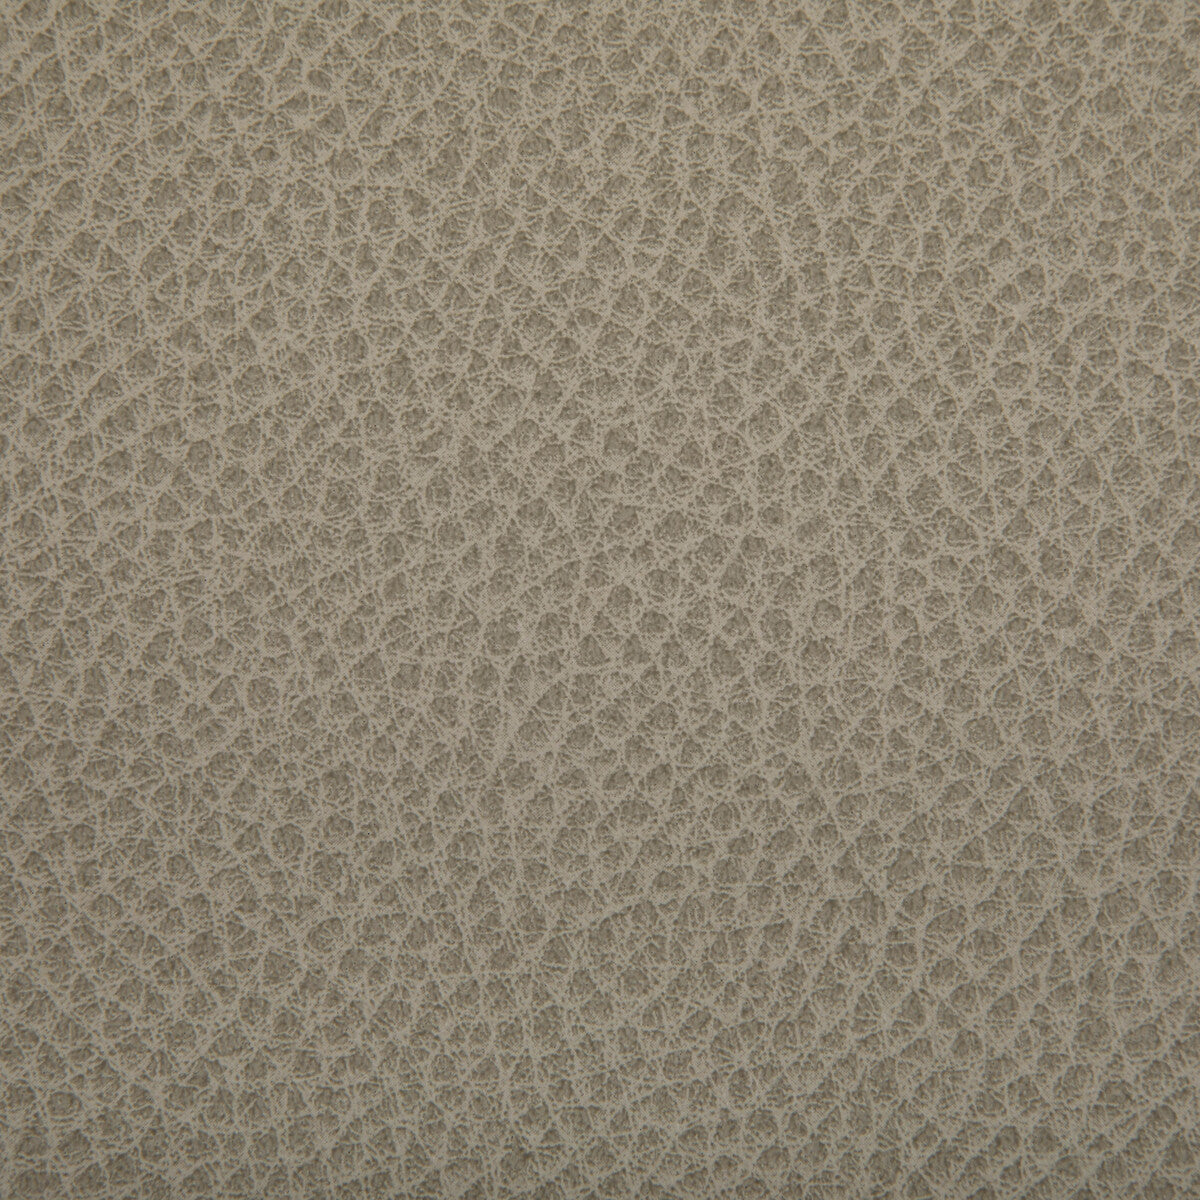 Woolf fabric in sandbar color - pattern WOOLF.121.0 - by Kravet Contract